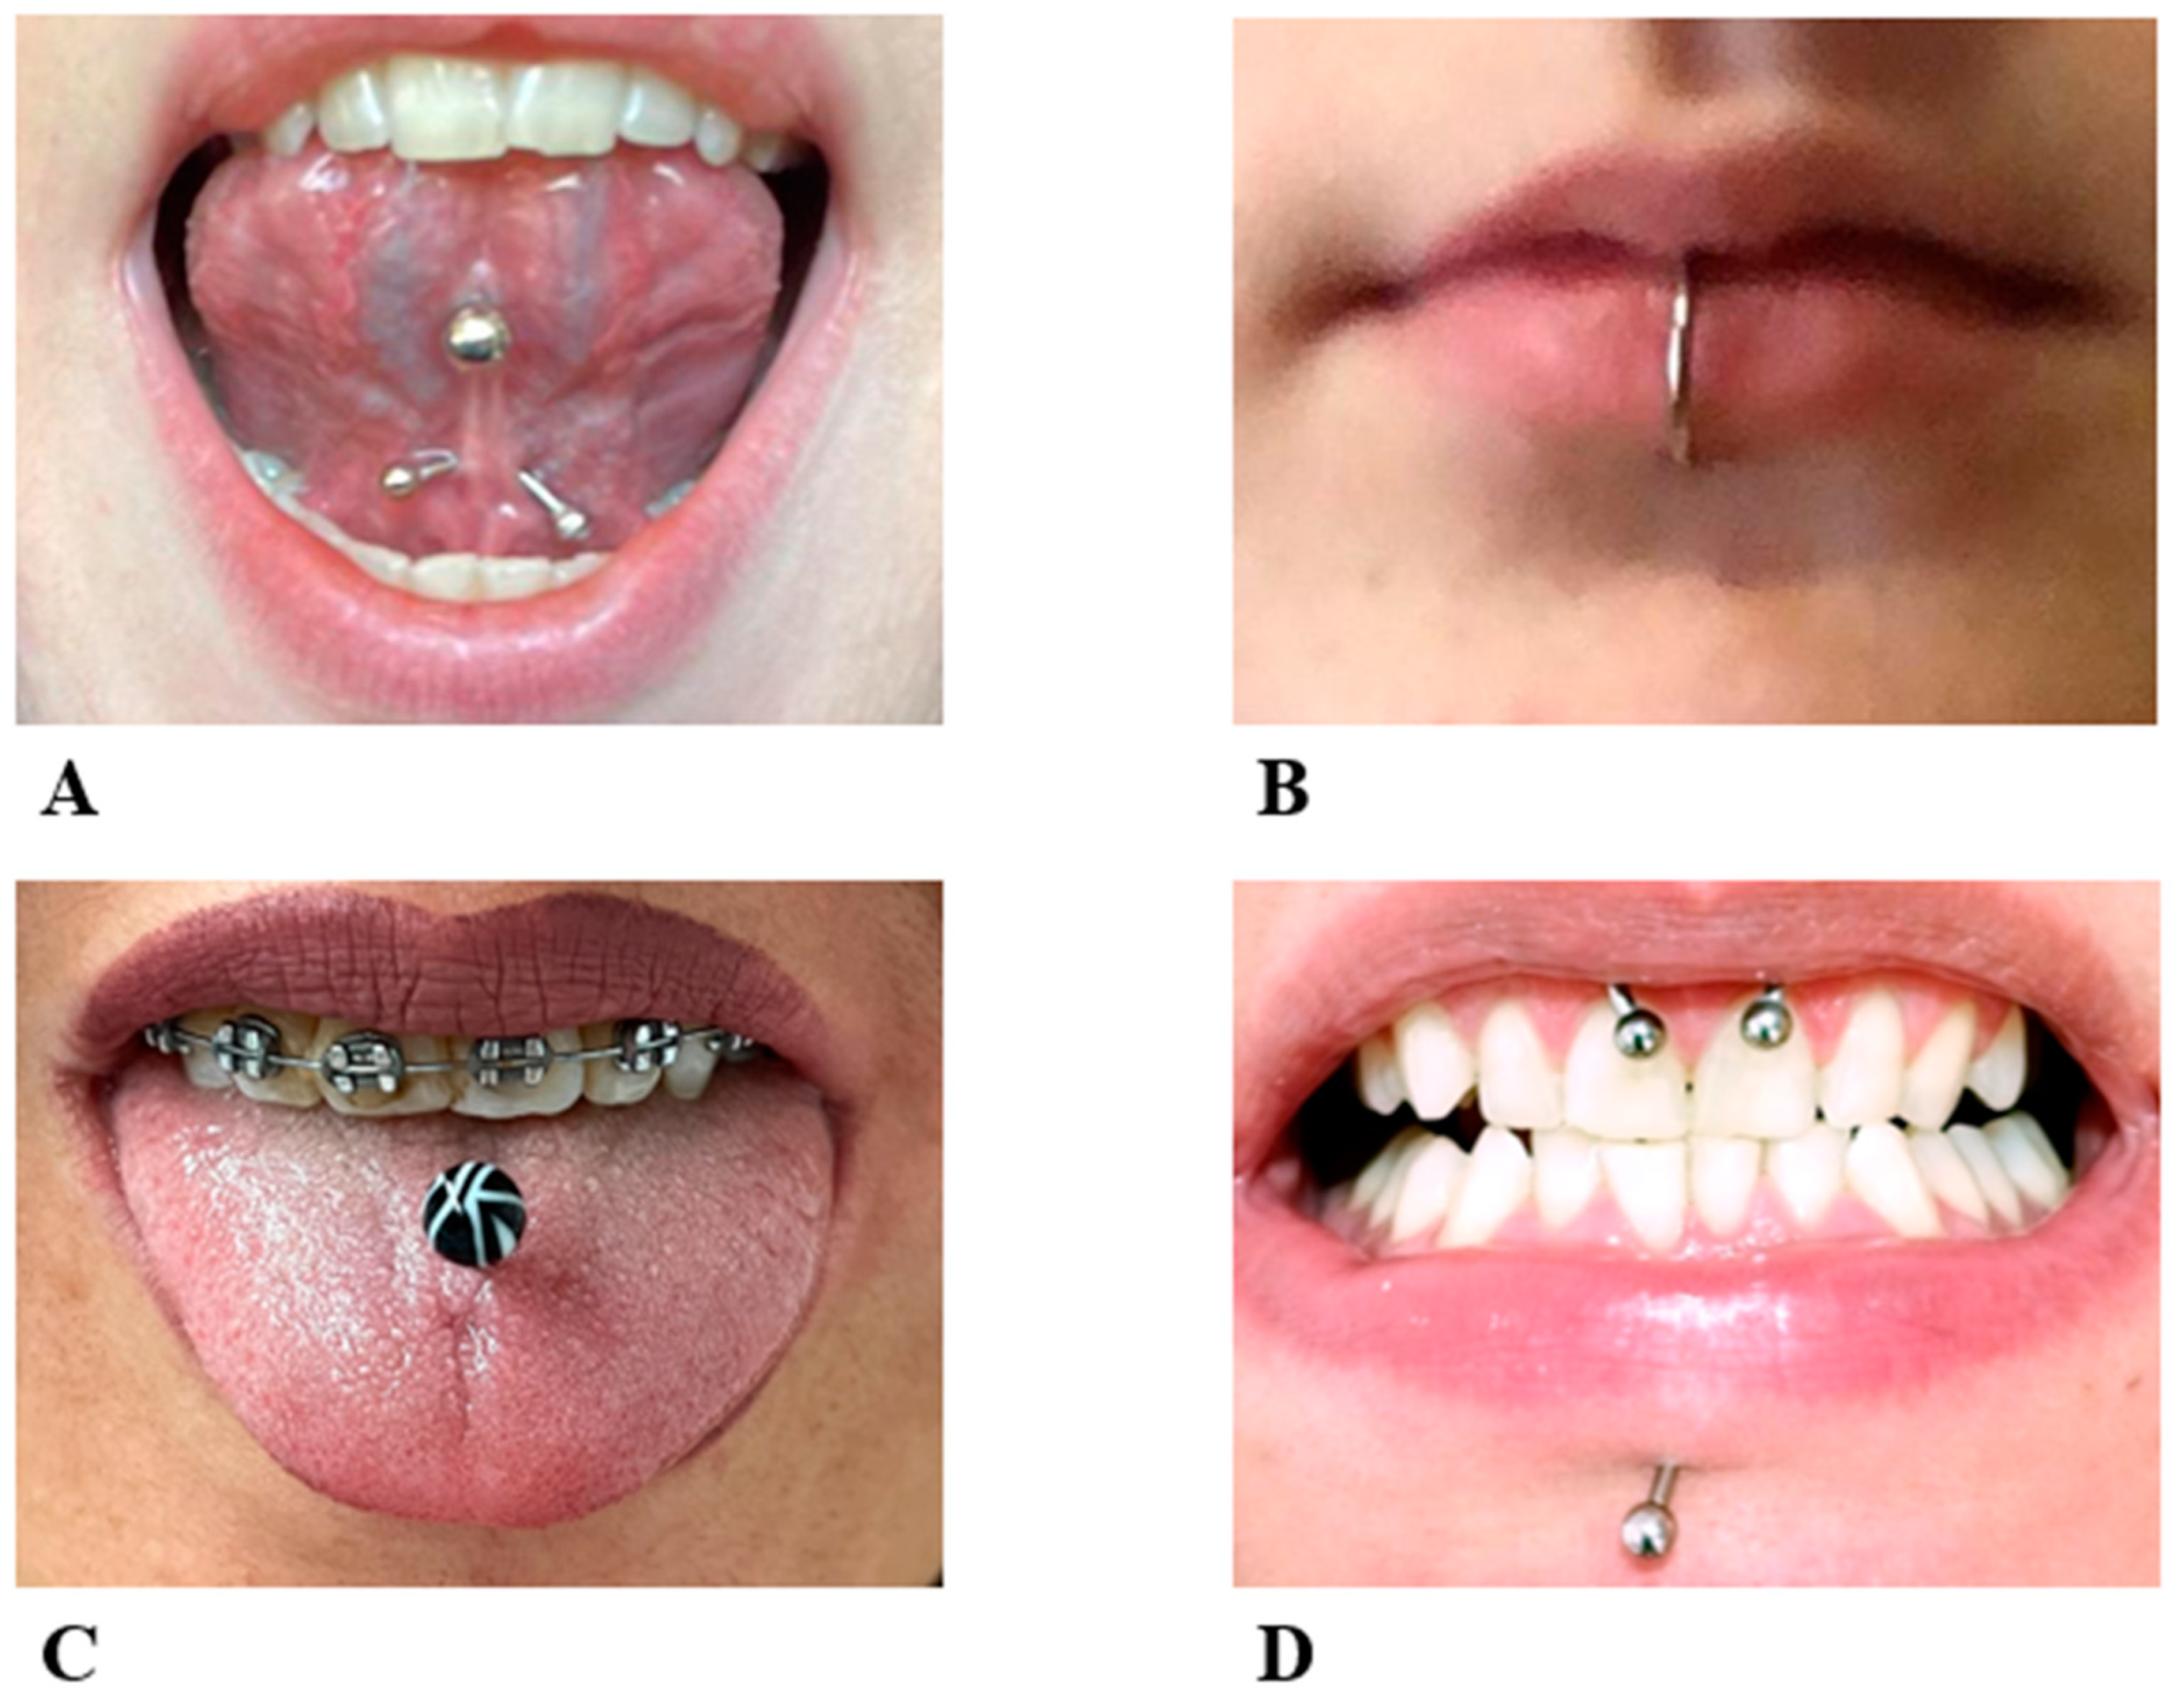 Oral piercing: what are the risks?